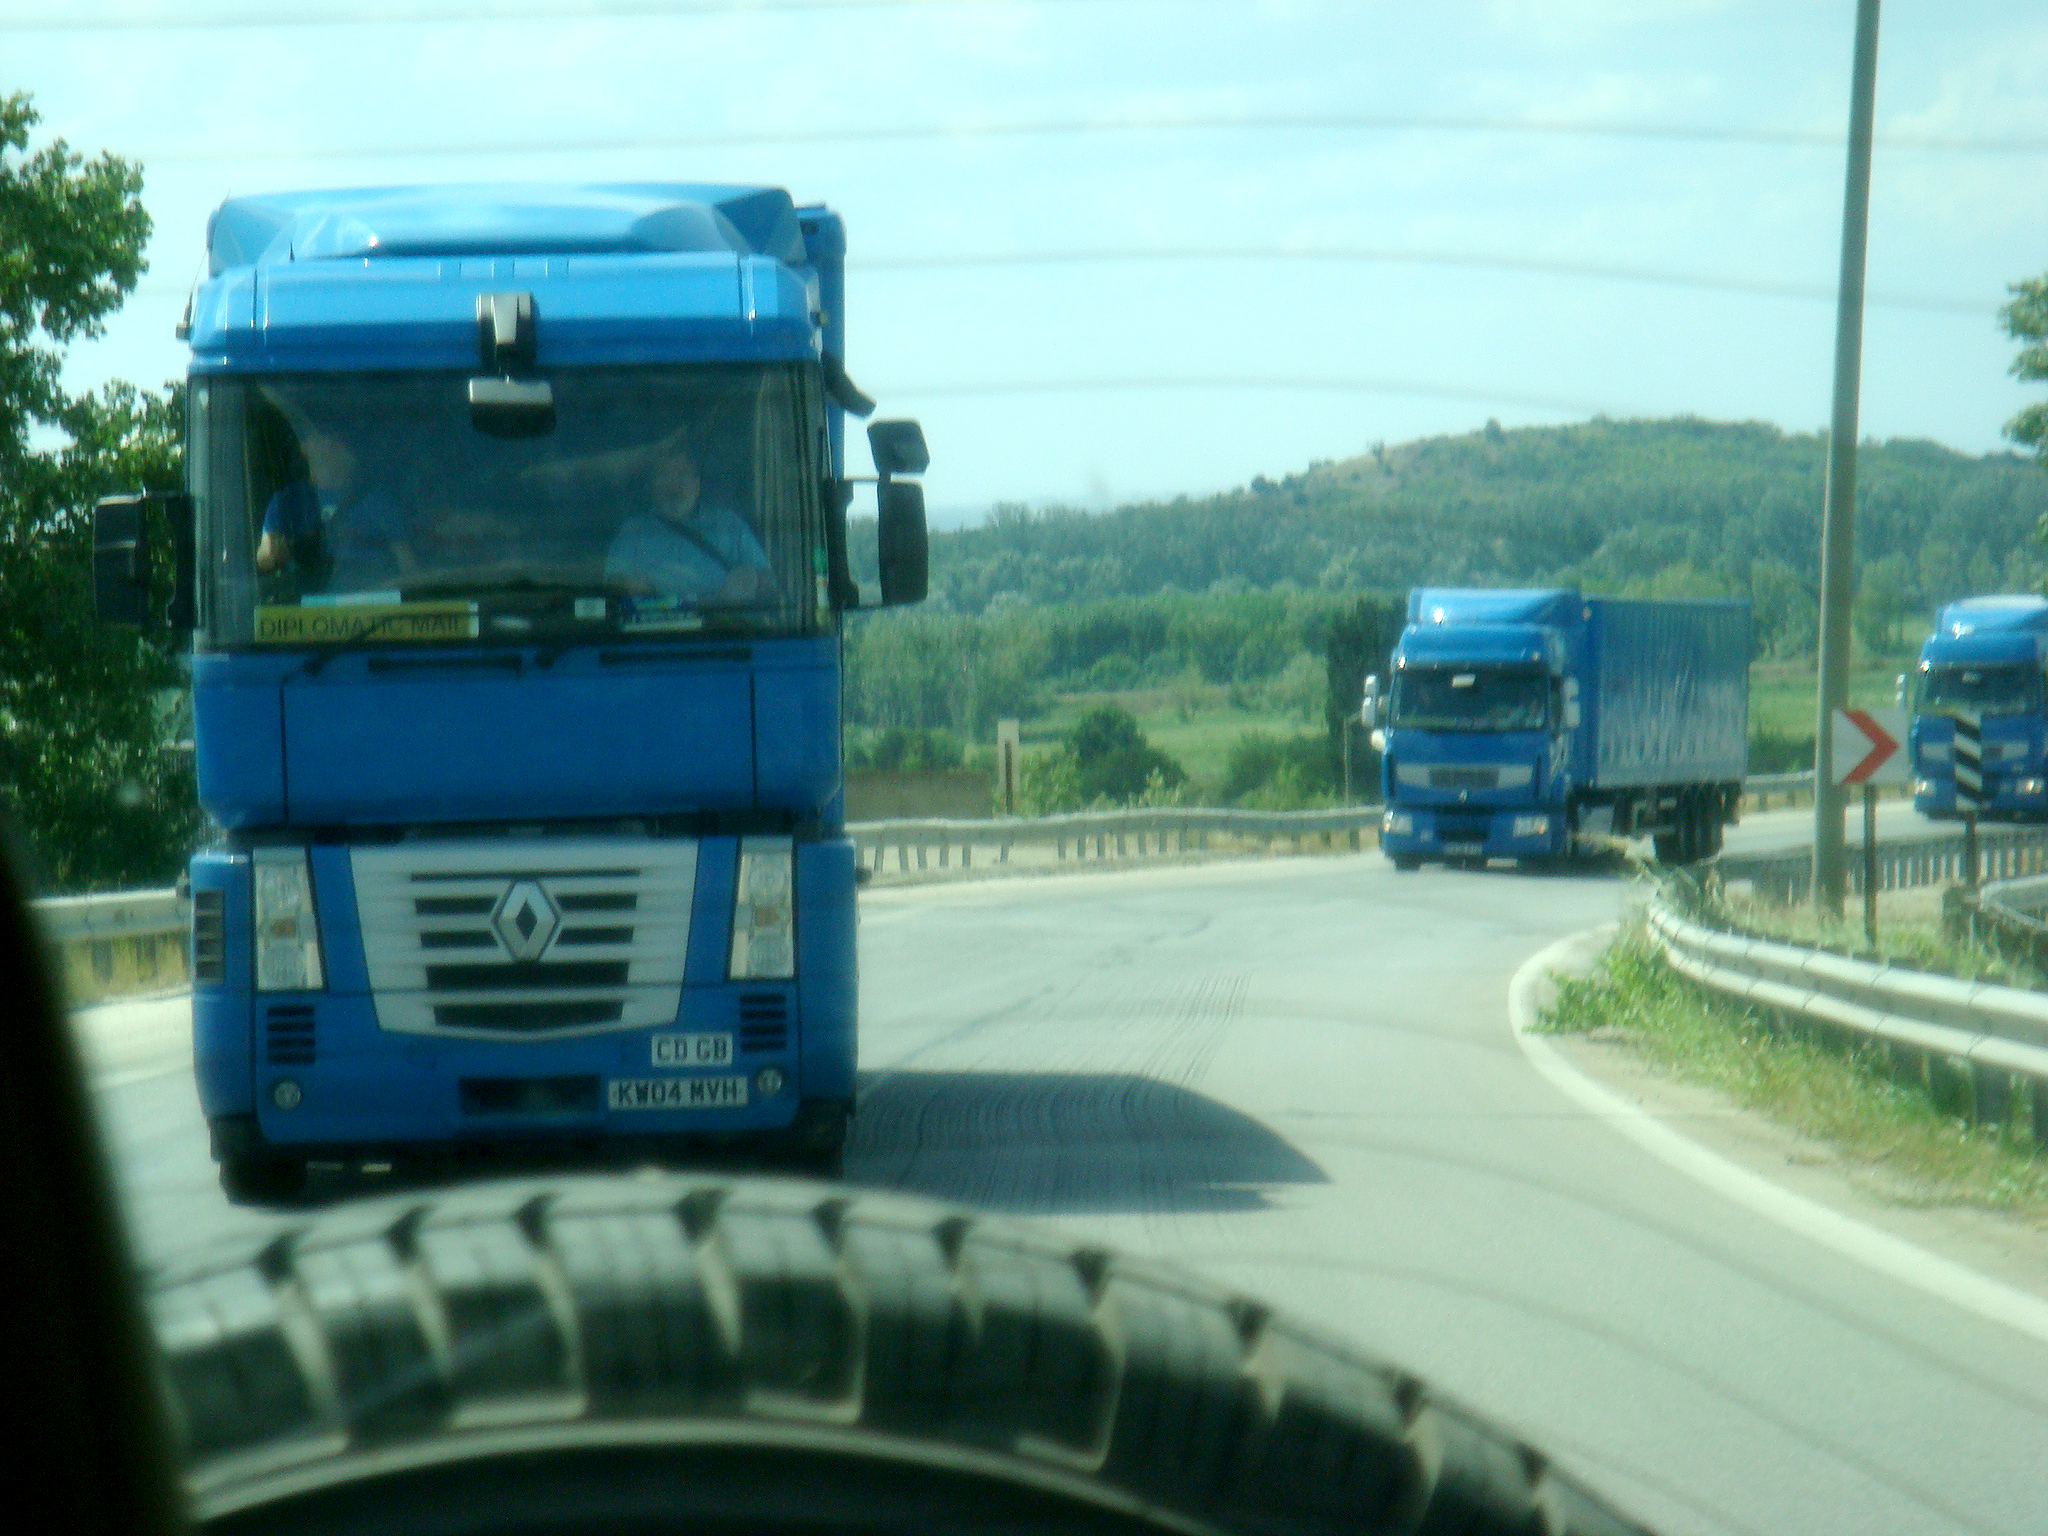 Three of our logistics HGV's in convoy on the road.